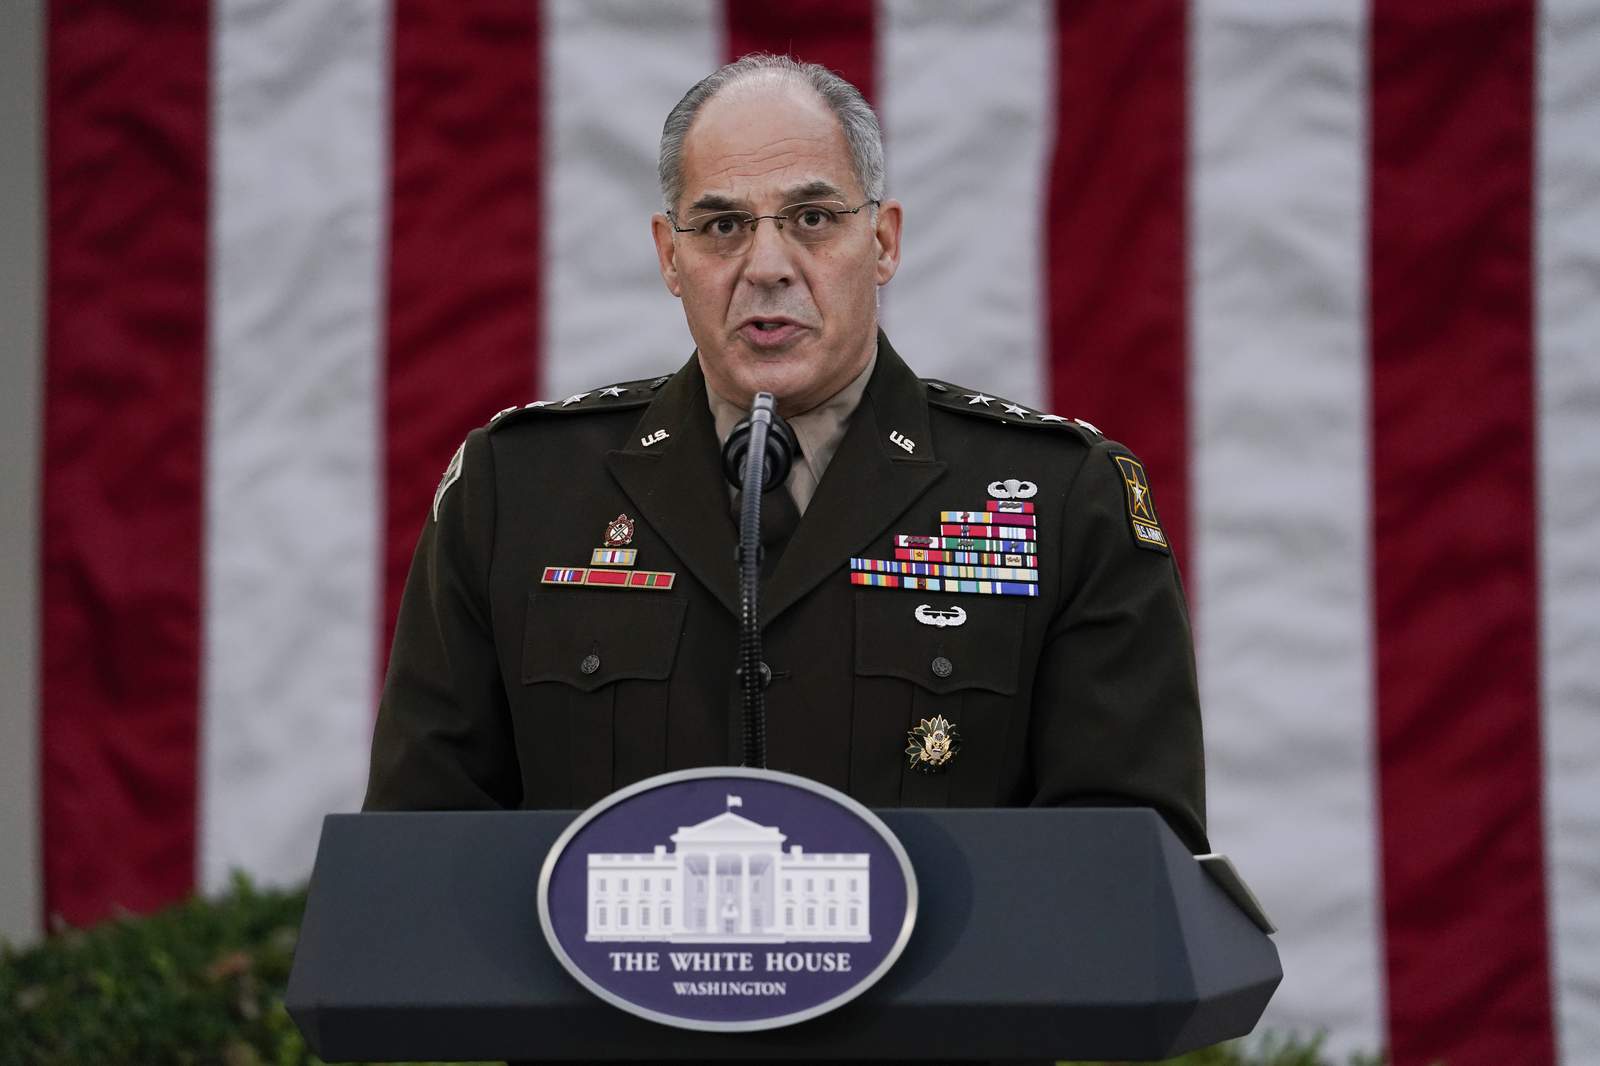 General sorry for ‘miscommunication’ over vaccine shipments